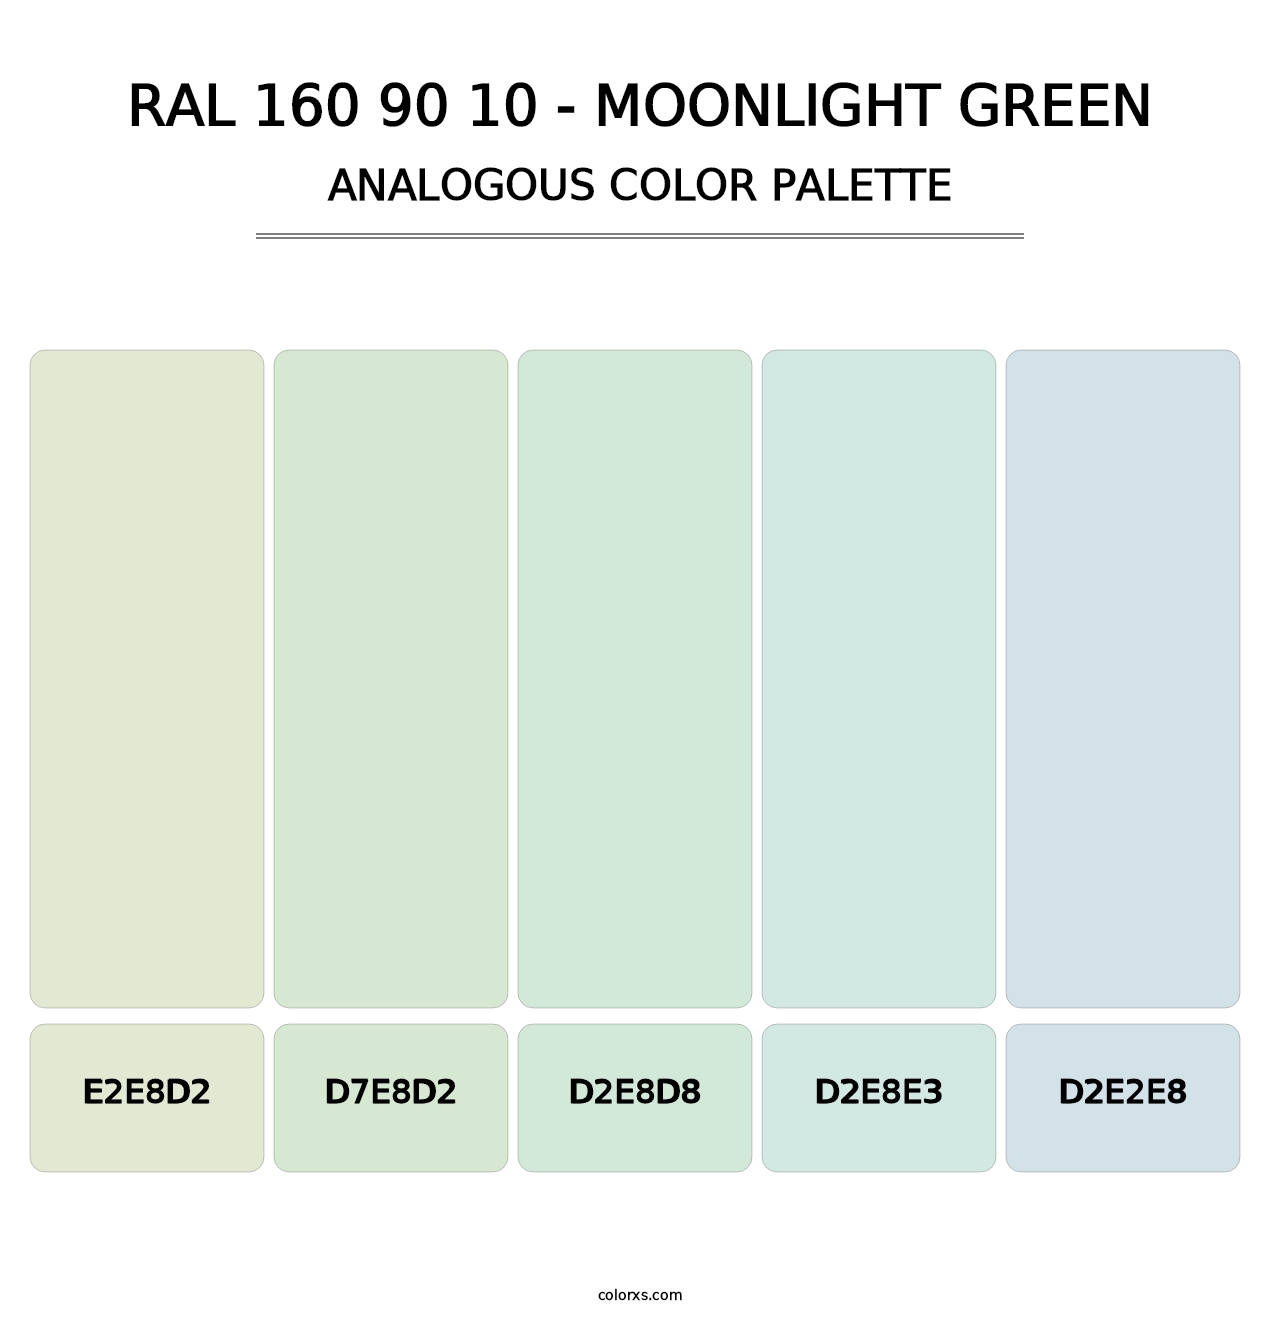 RAL 160 90 10 - Moonlight Green - Analogous Color Palette